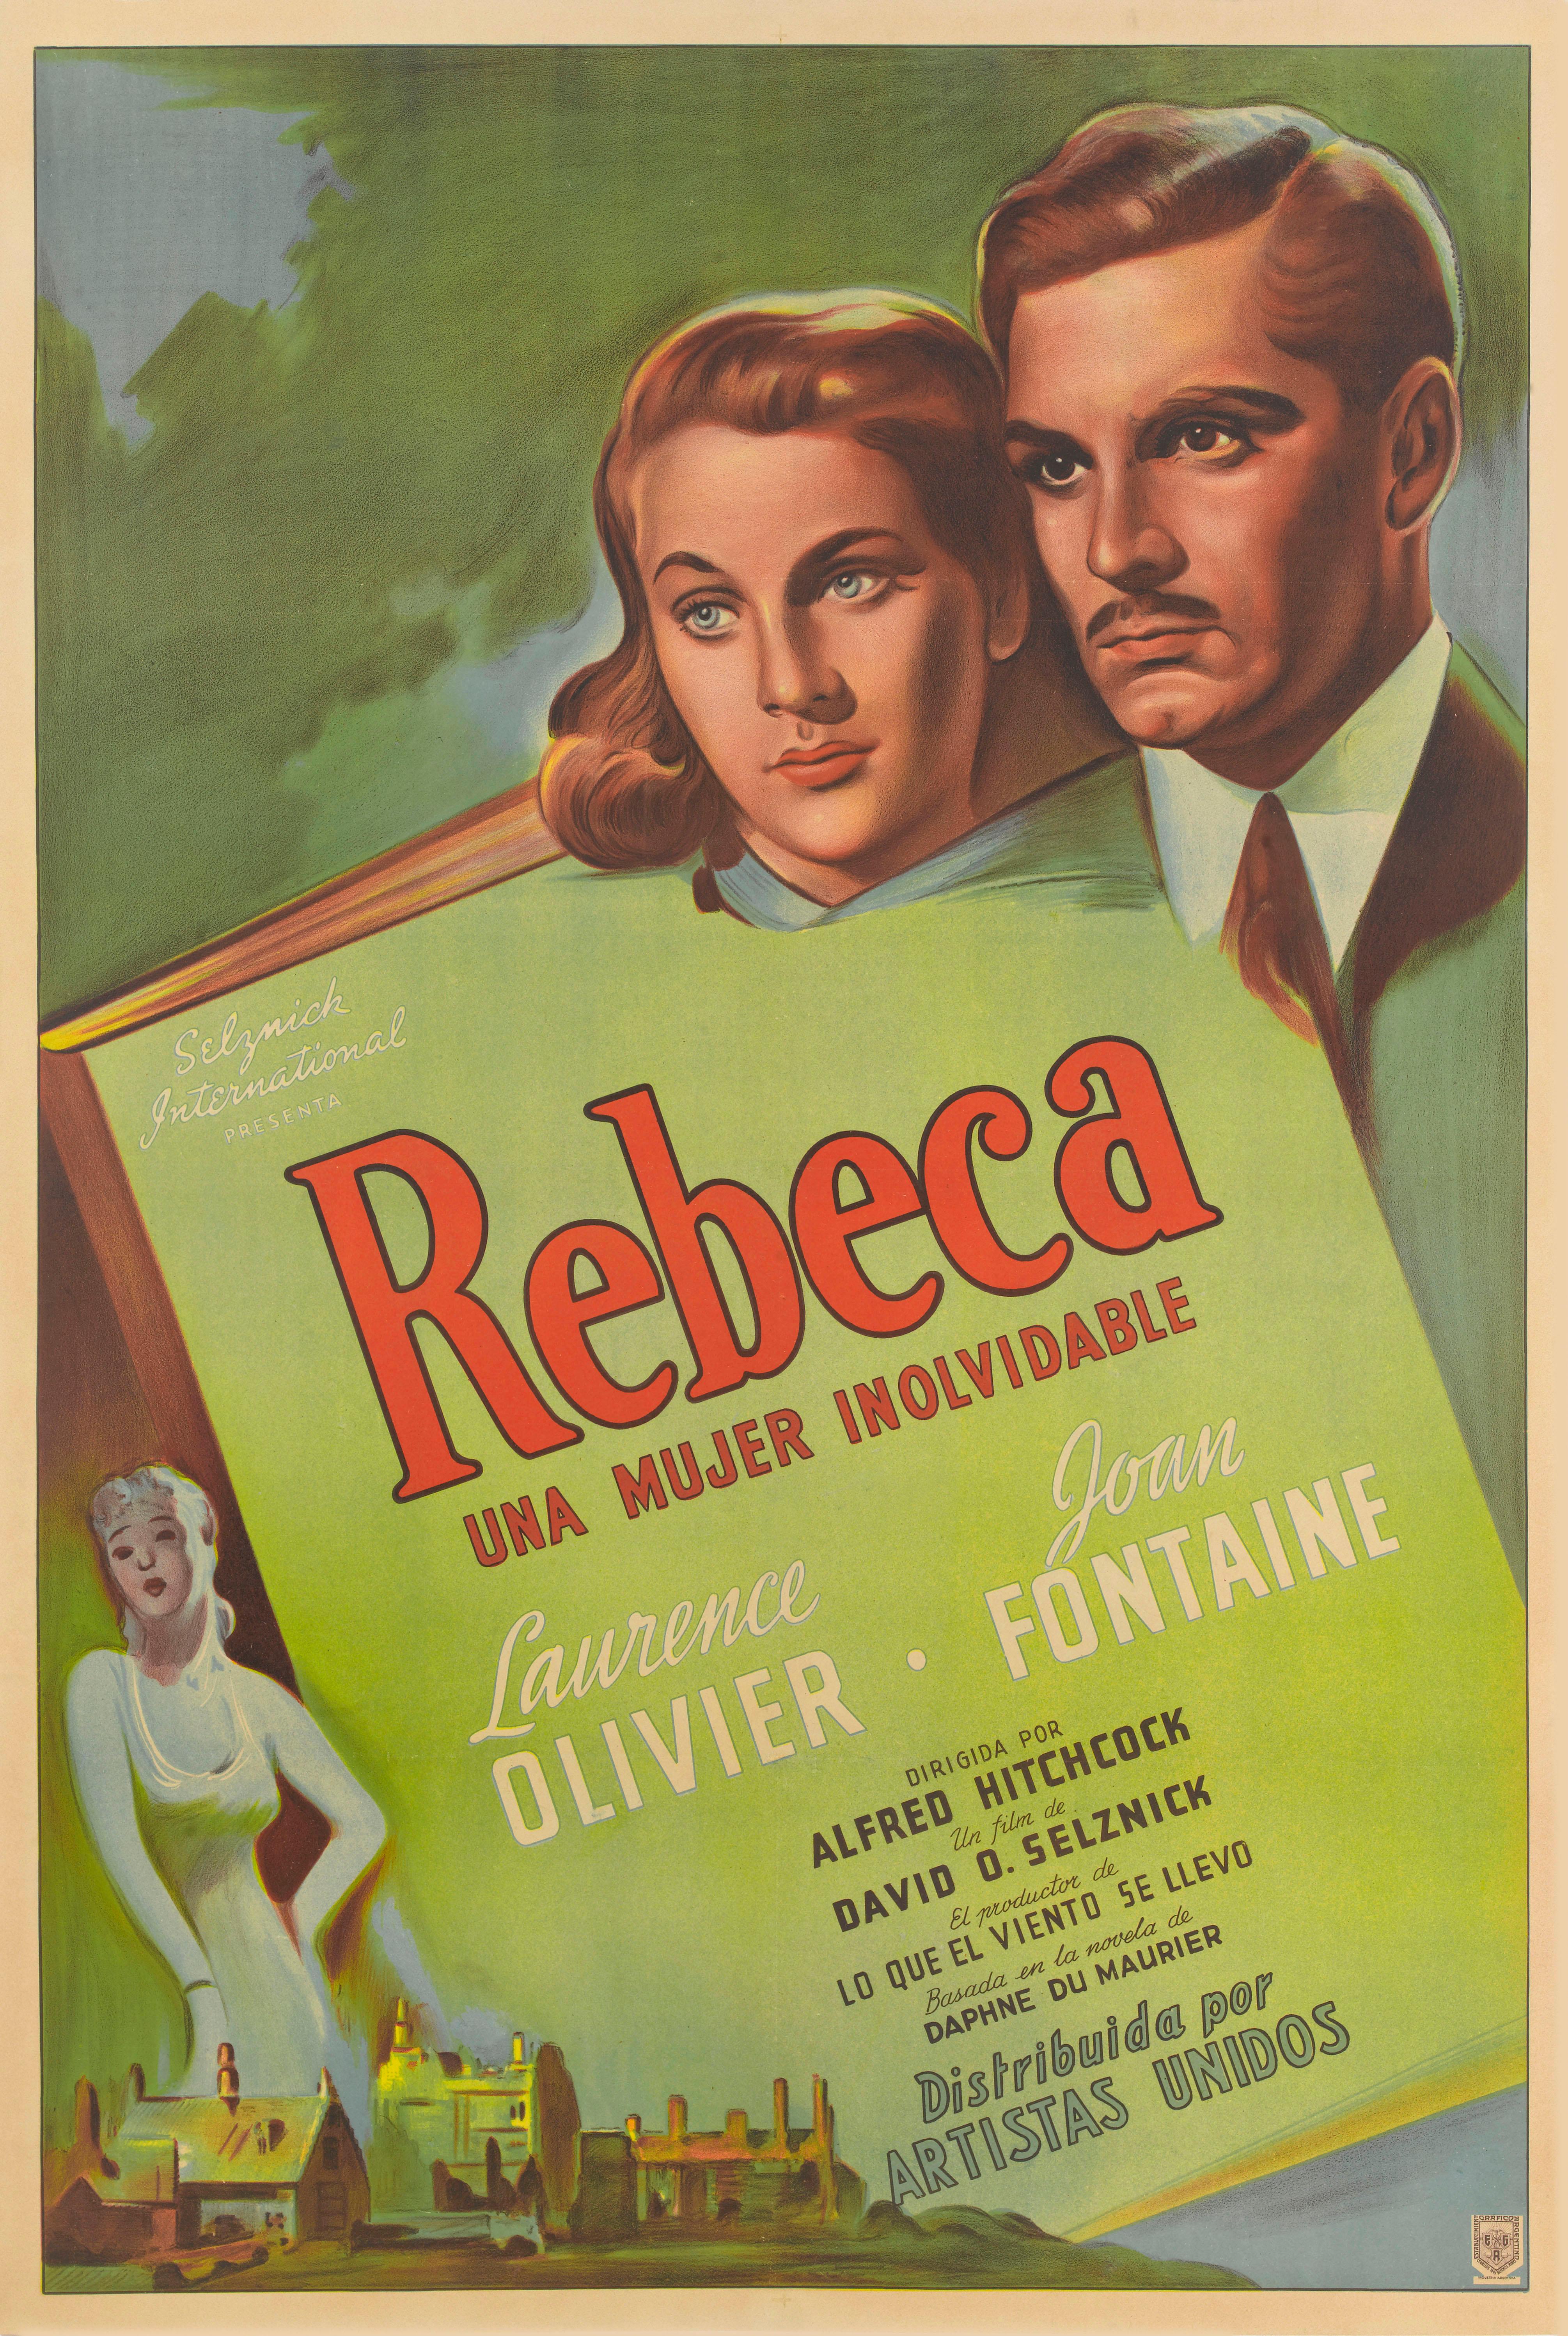 Original IArgentine film poster for Rebecca, 1940.
Daphne du Maurier's gripping 1938 novel was made into a film in 1940 by Alfred Hitchcock. It was Hitchcock's first project in America, and the first that he made whilst under contract with David O.